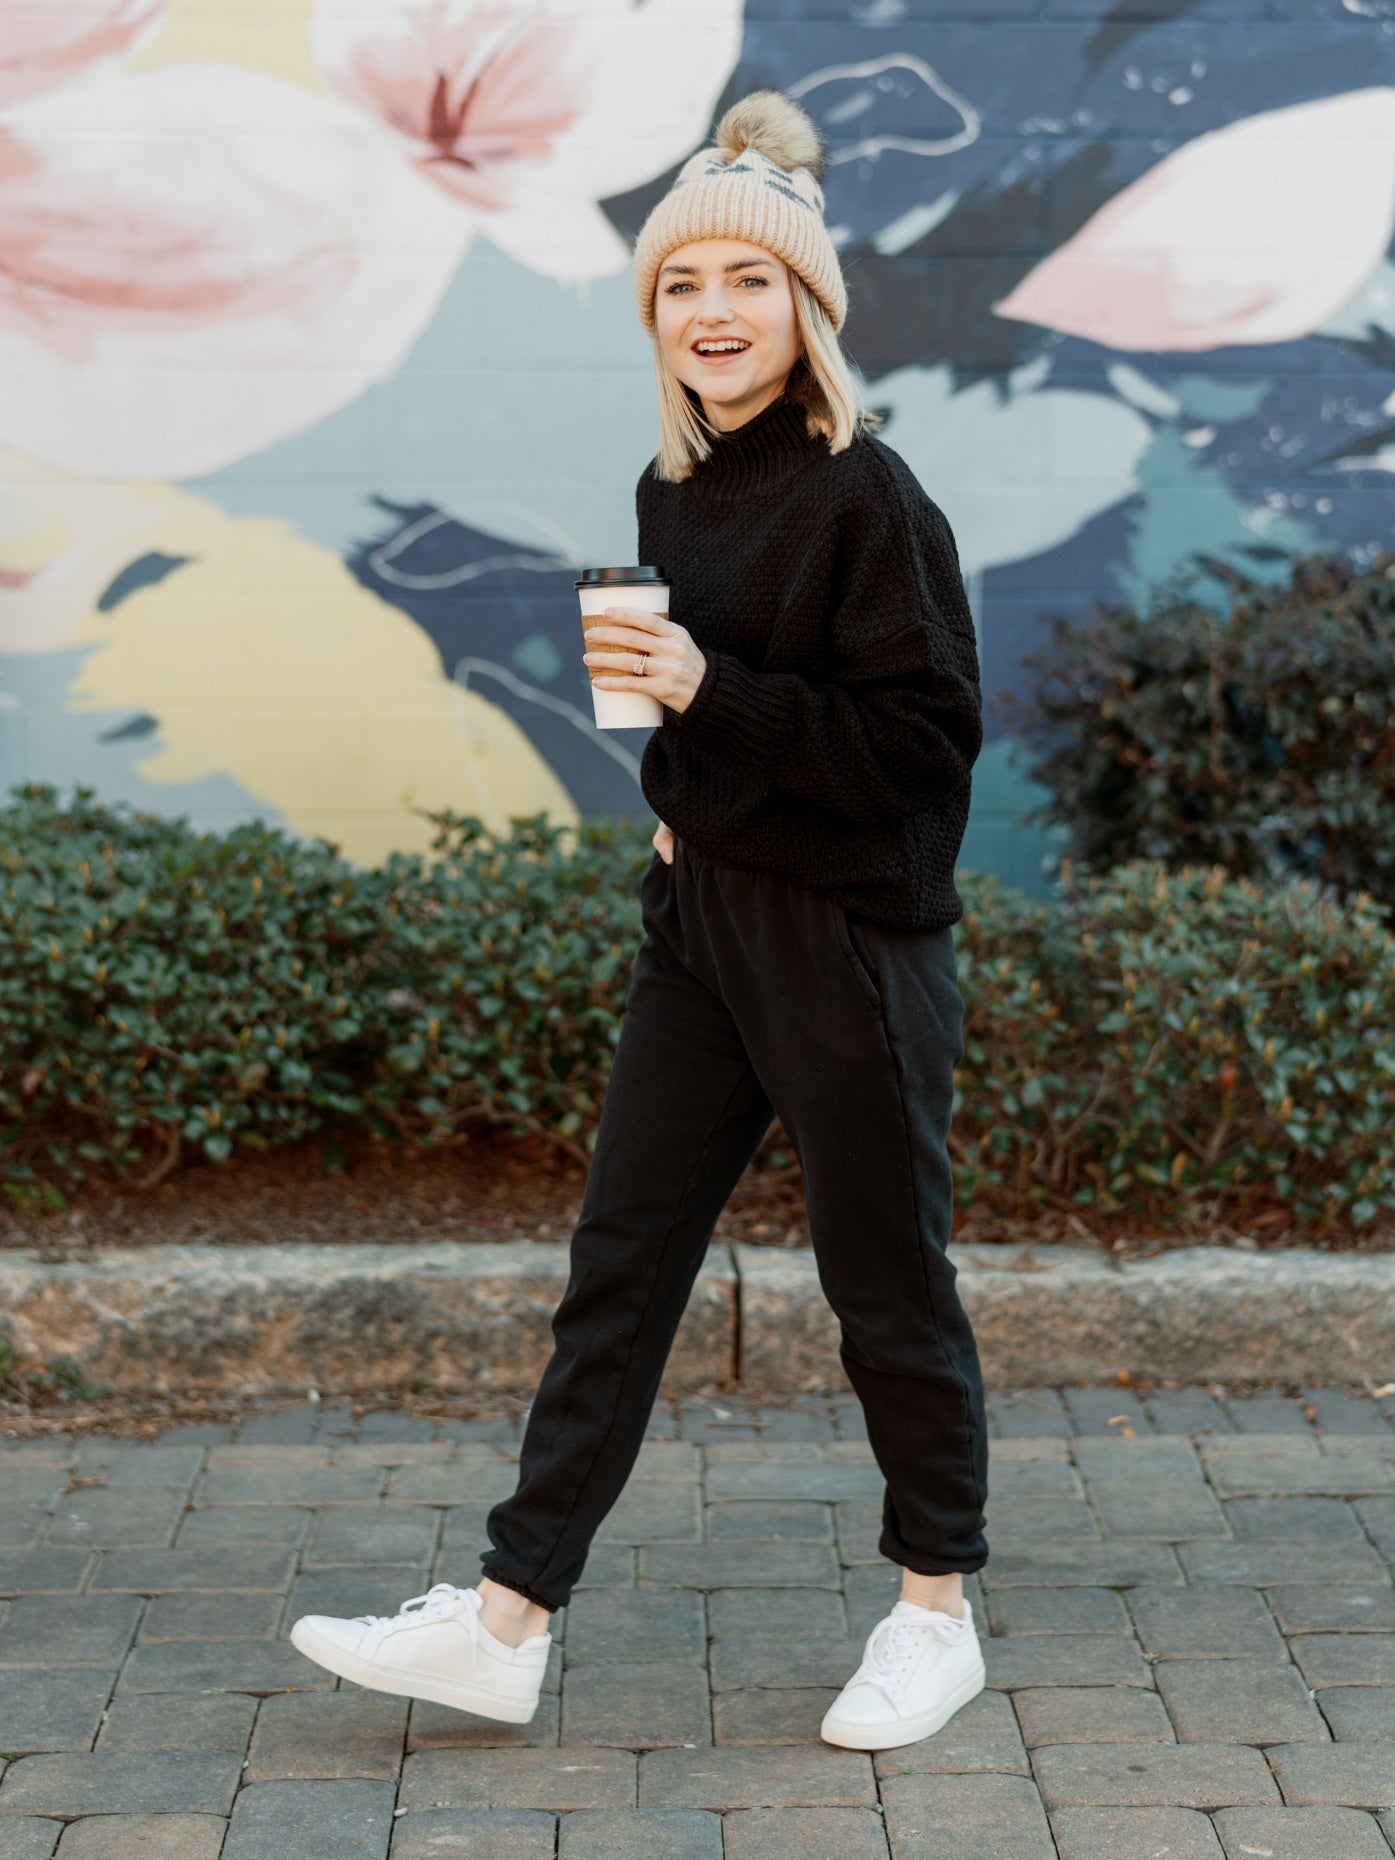 How To Style Sweatpants In Winter? – solowomen